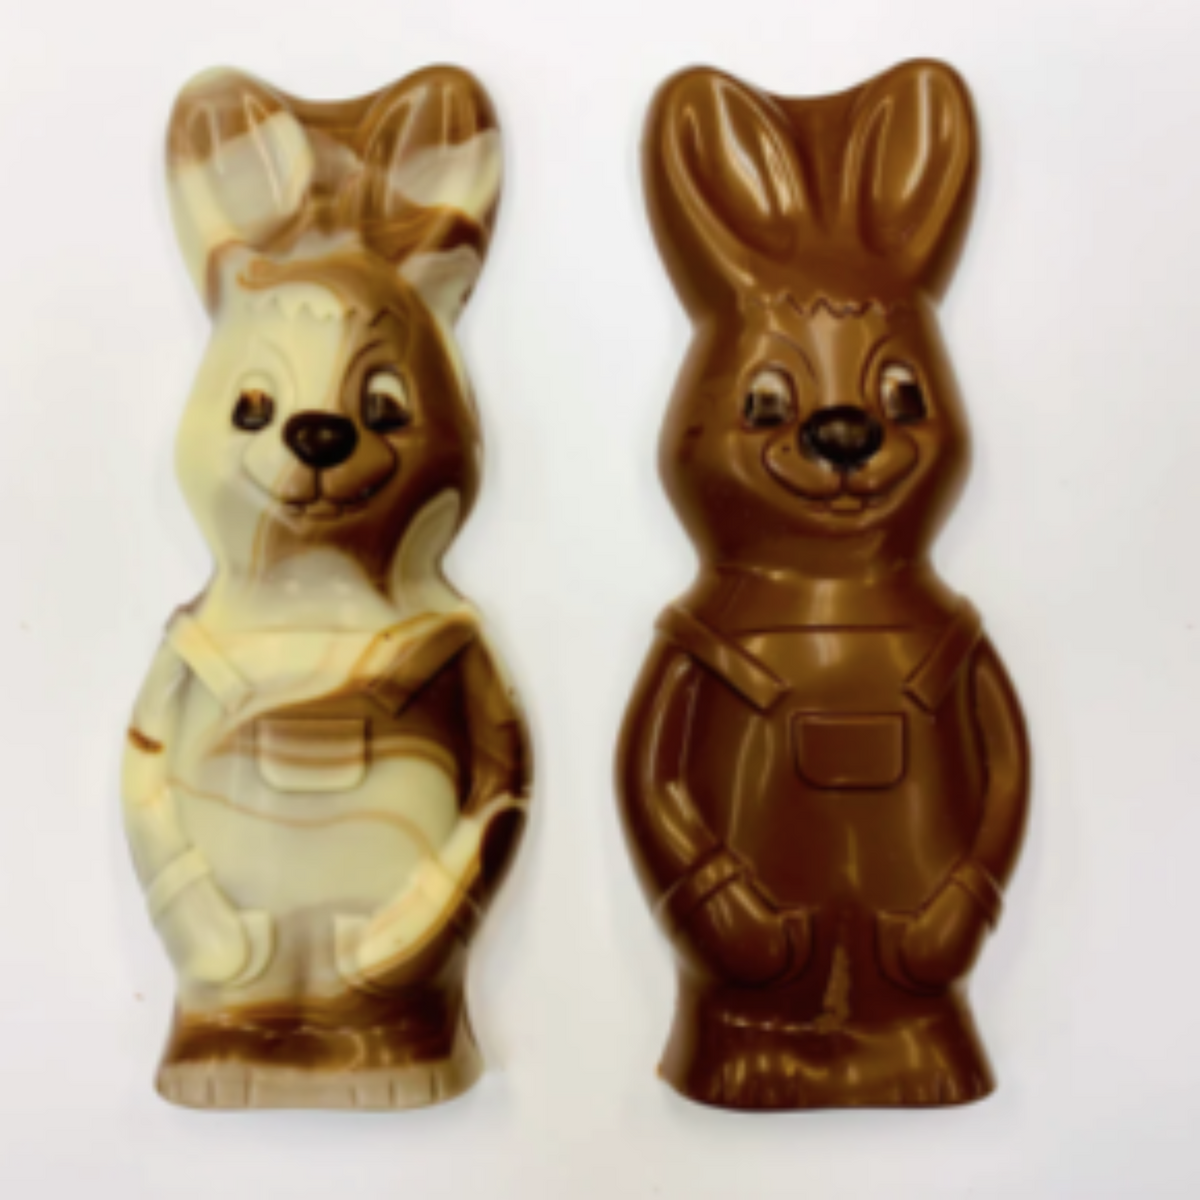 Bunny in Overalls Chocolate